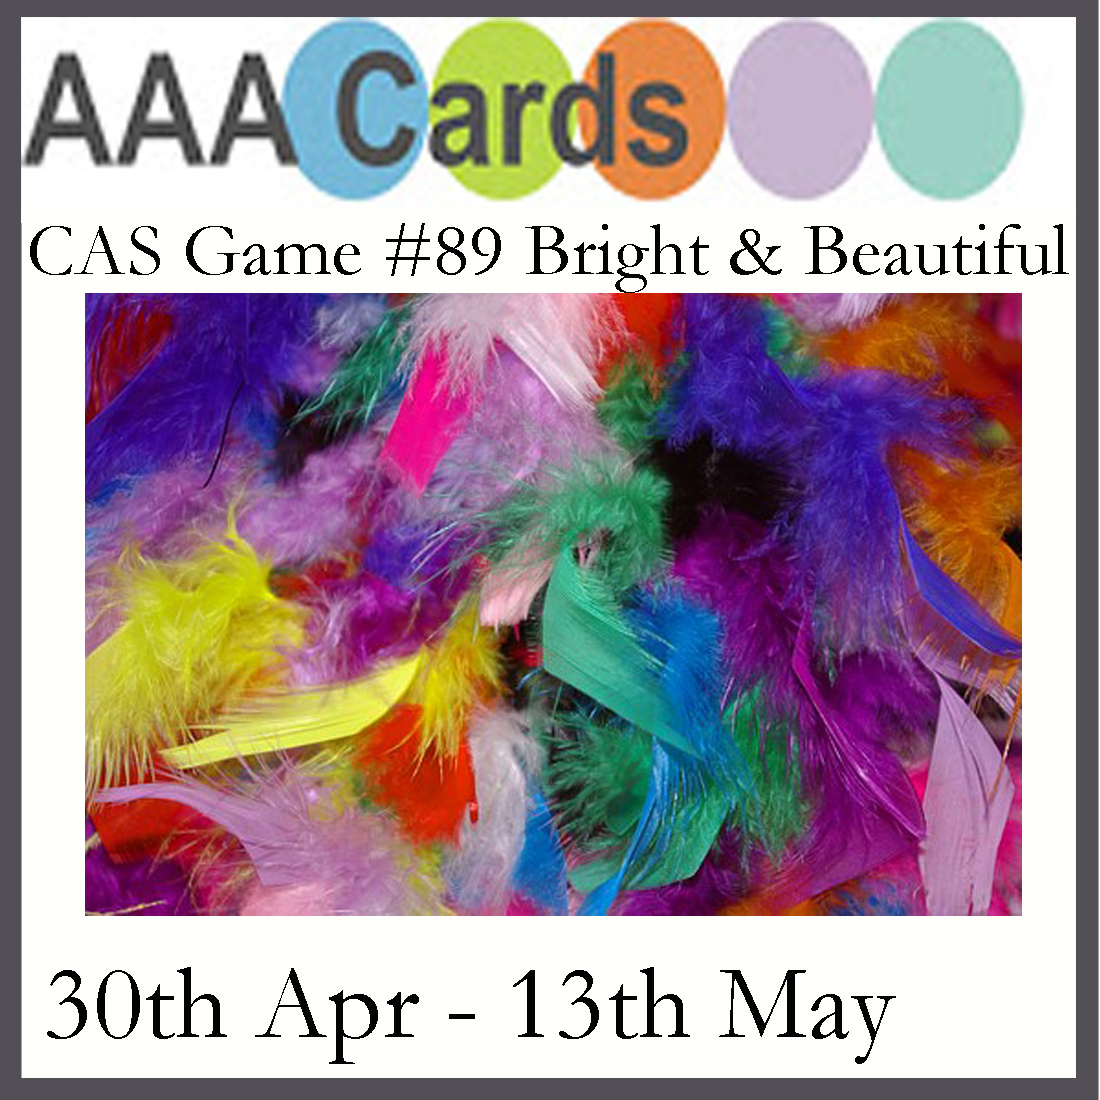 Be bright be beautiful. CAS Cards Challenge. AAA Card.